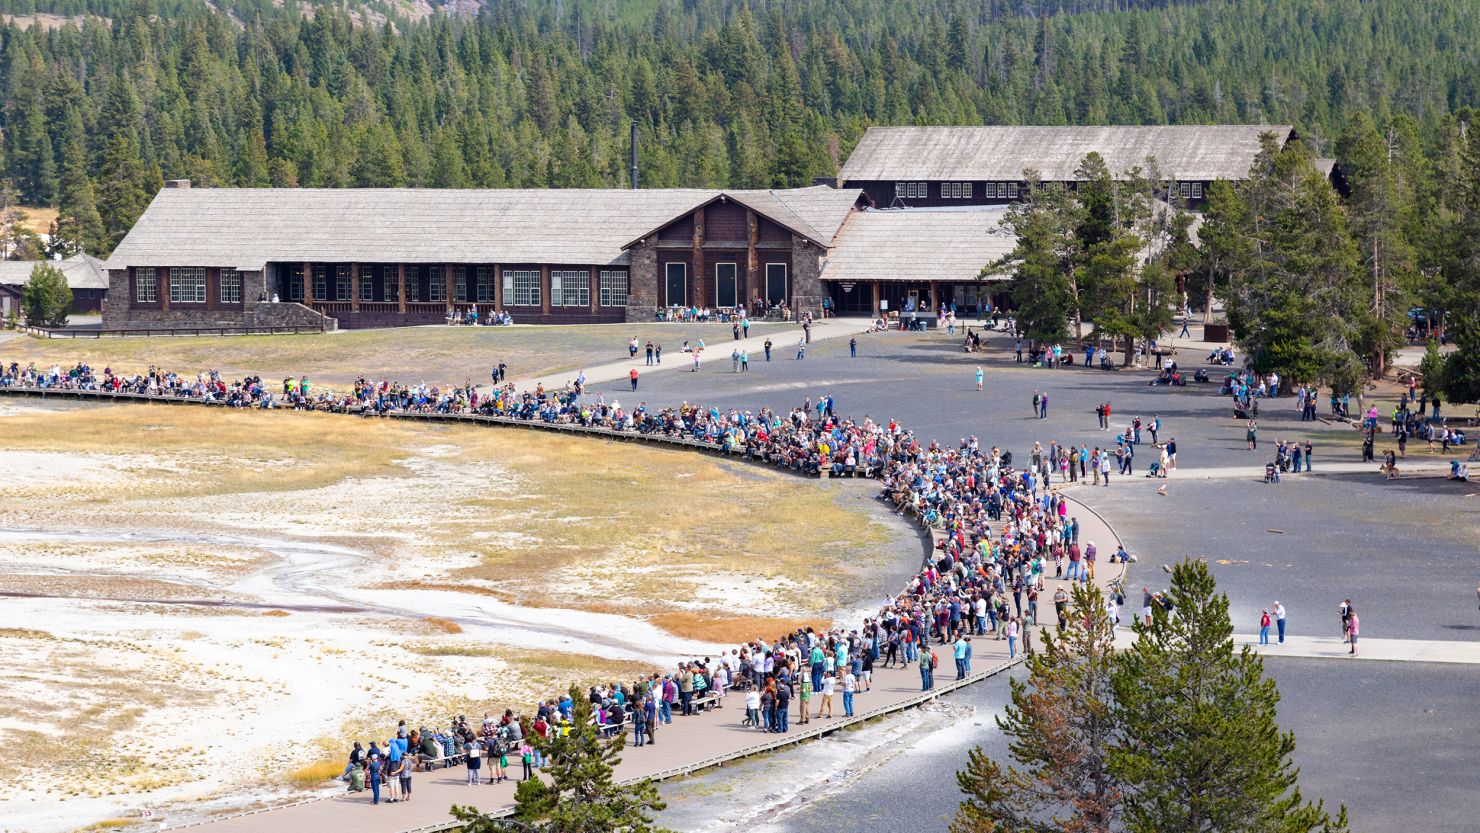 Crowds gather for an afternoon Old Faithful geyser eruption in September 2021. Jacob W. Frank/NPS